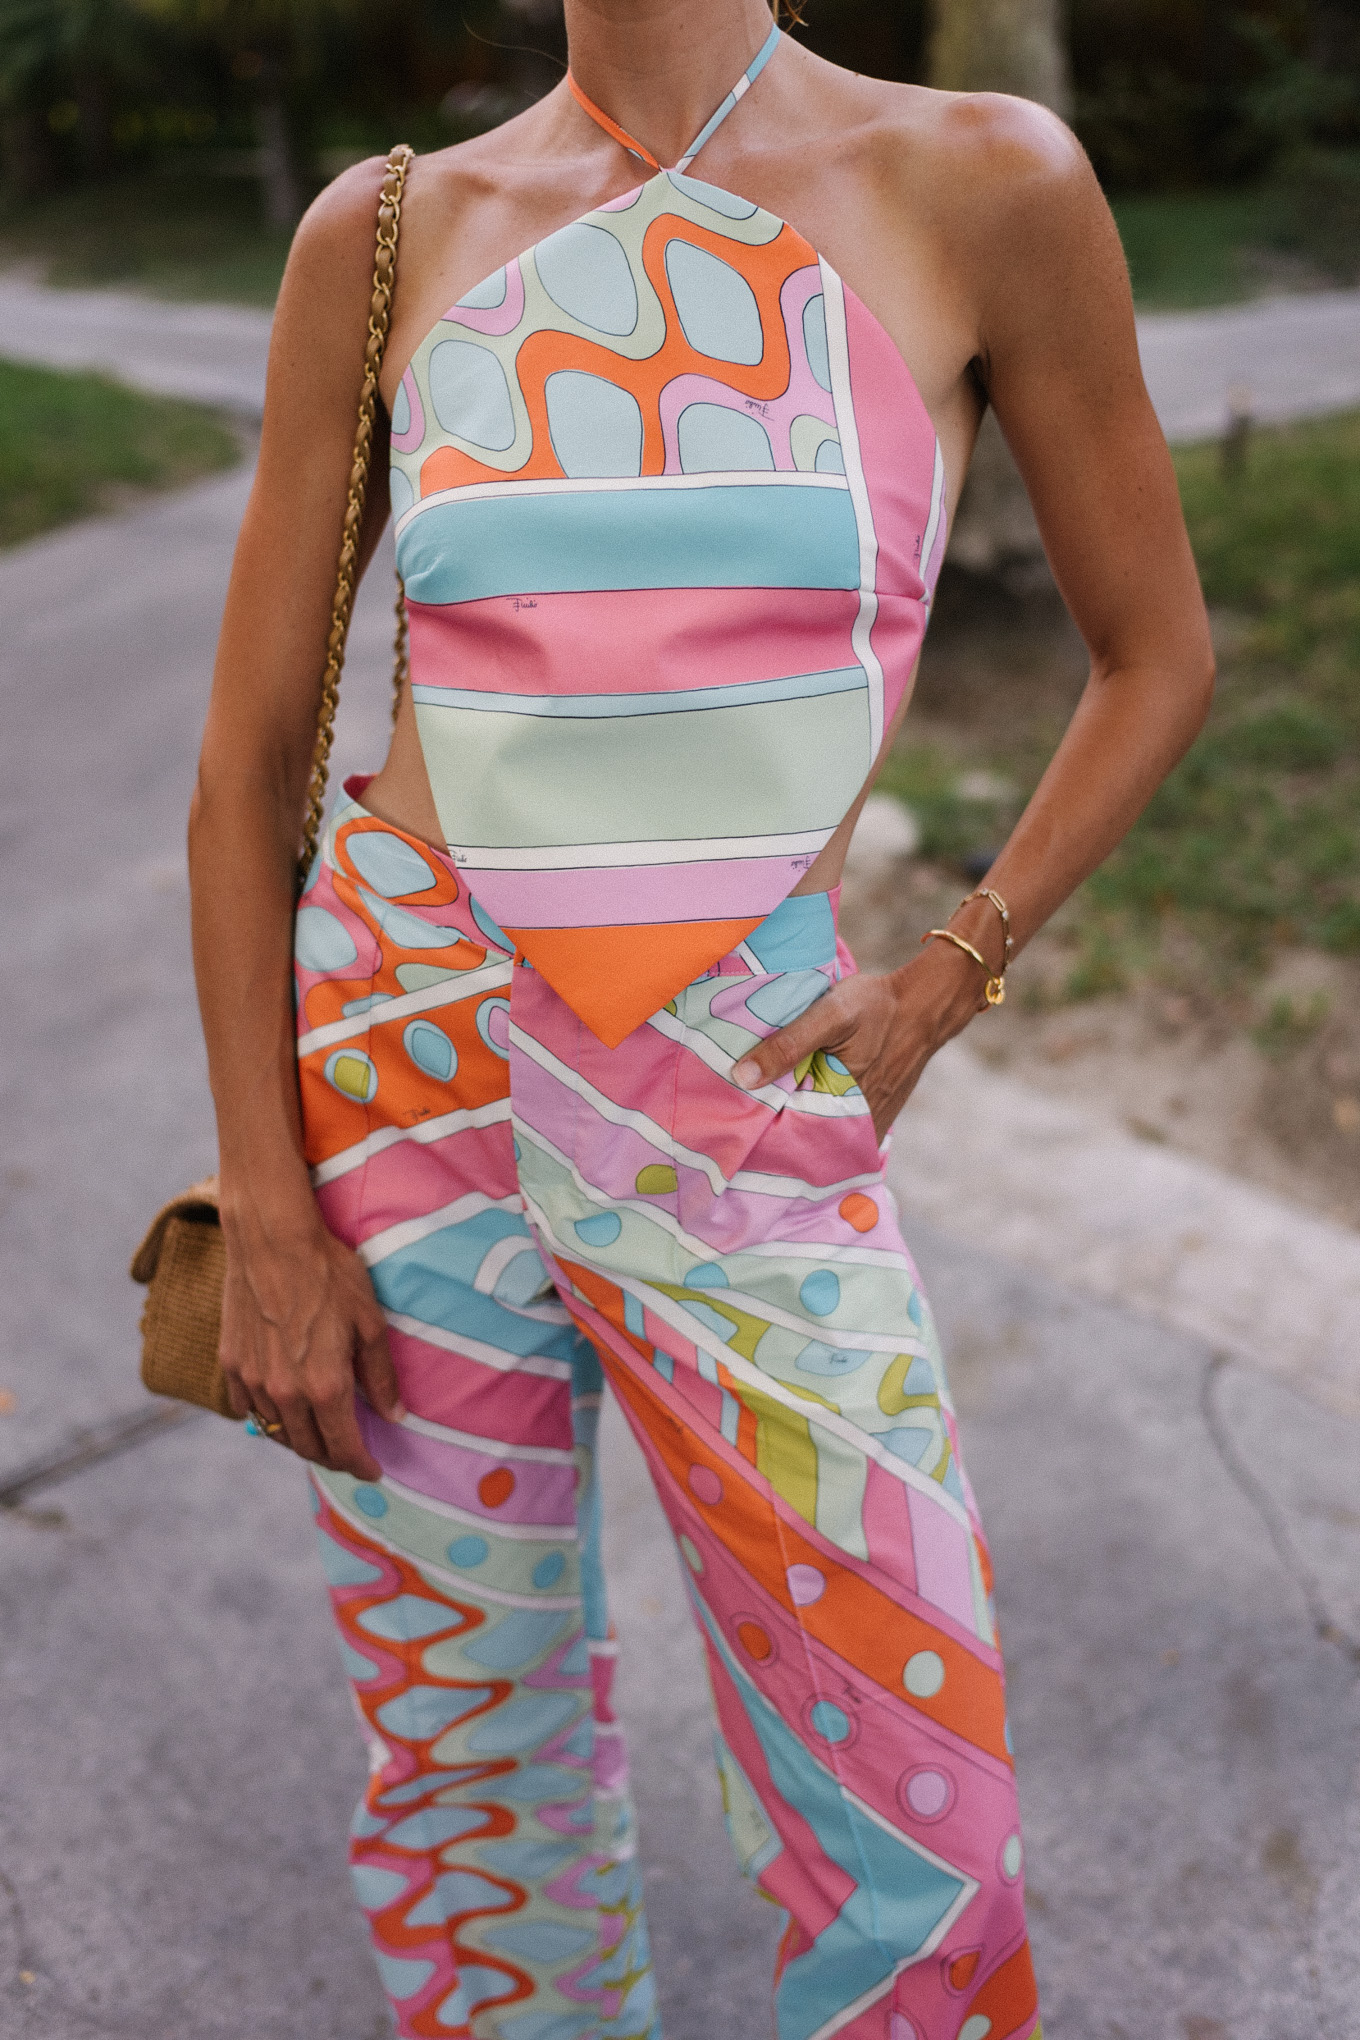 Bright patterned tank top and pants set